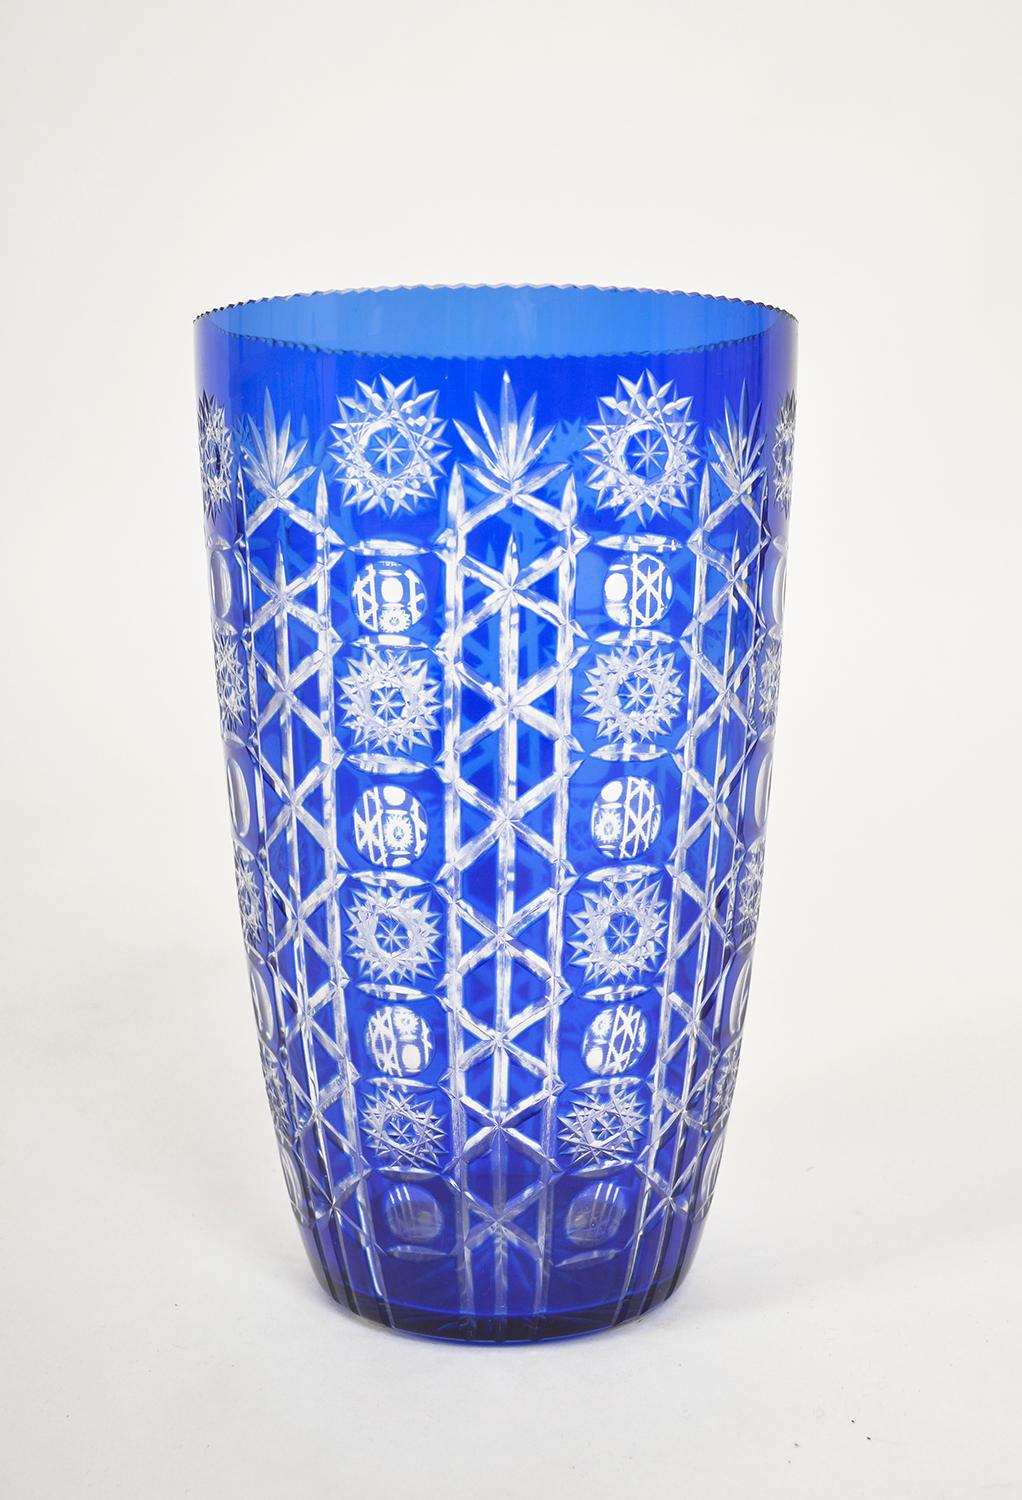 A large and striking cut crystal vase in cobalt blue made in Czechoslovakia. 
The vase has been very well cared for – the foot of the vase has four protect pads on the bottom and there are no chips, scratches or watermarks. The vase makes an